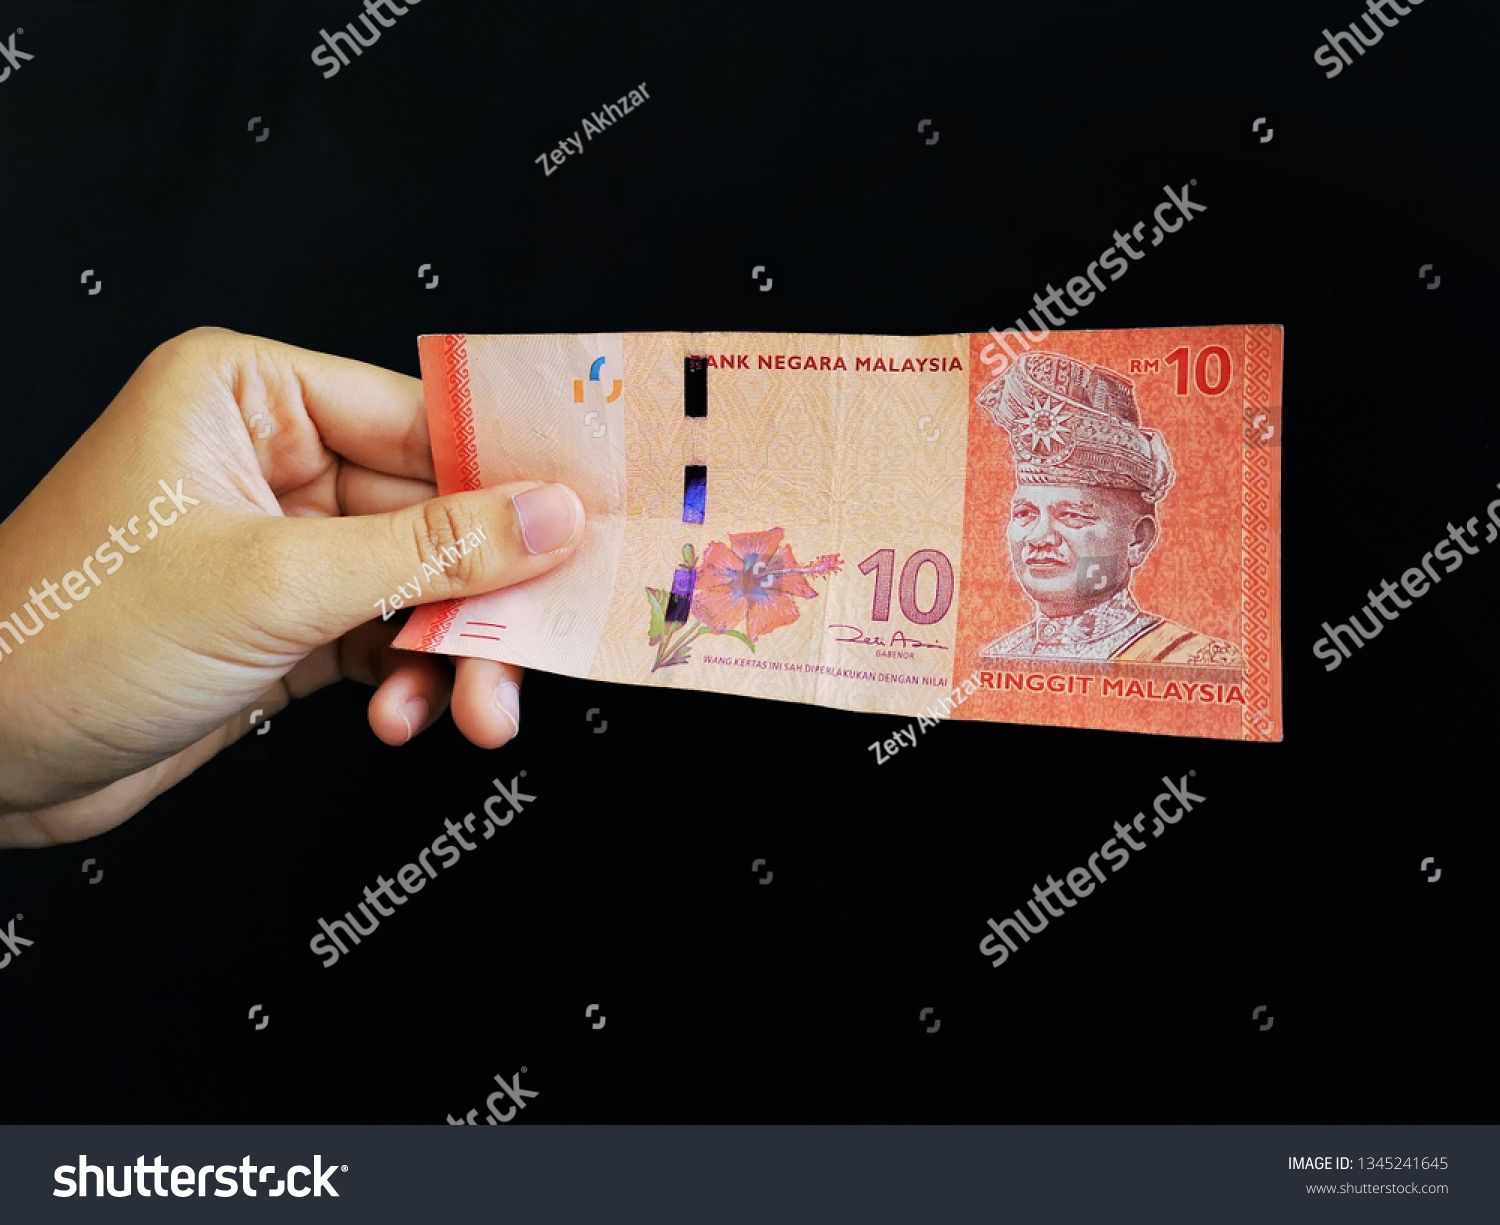 To myr pound sterling 1 GBP to